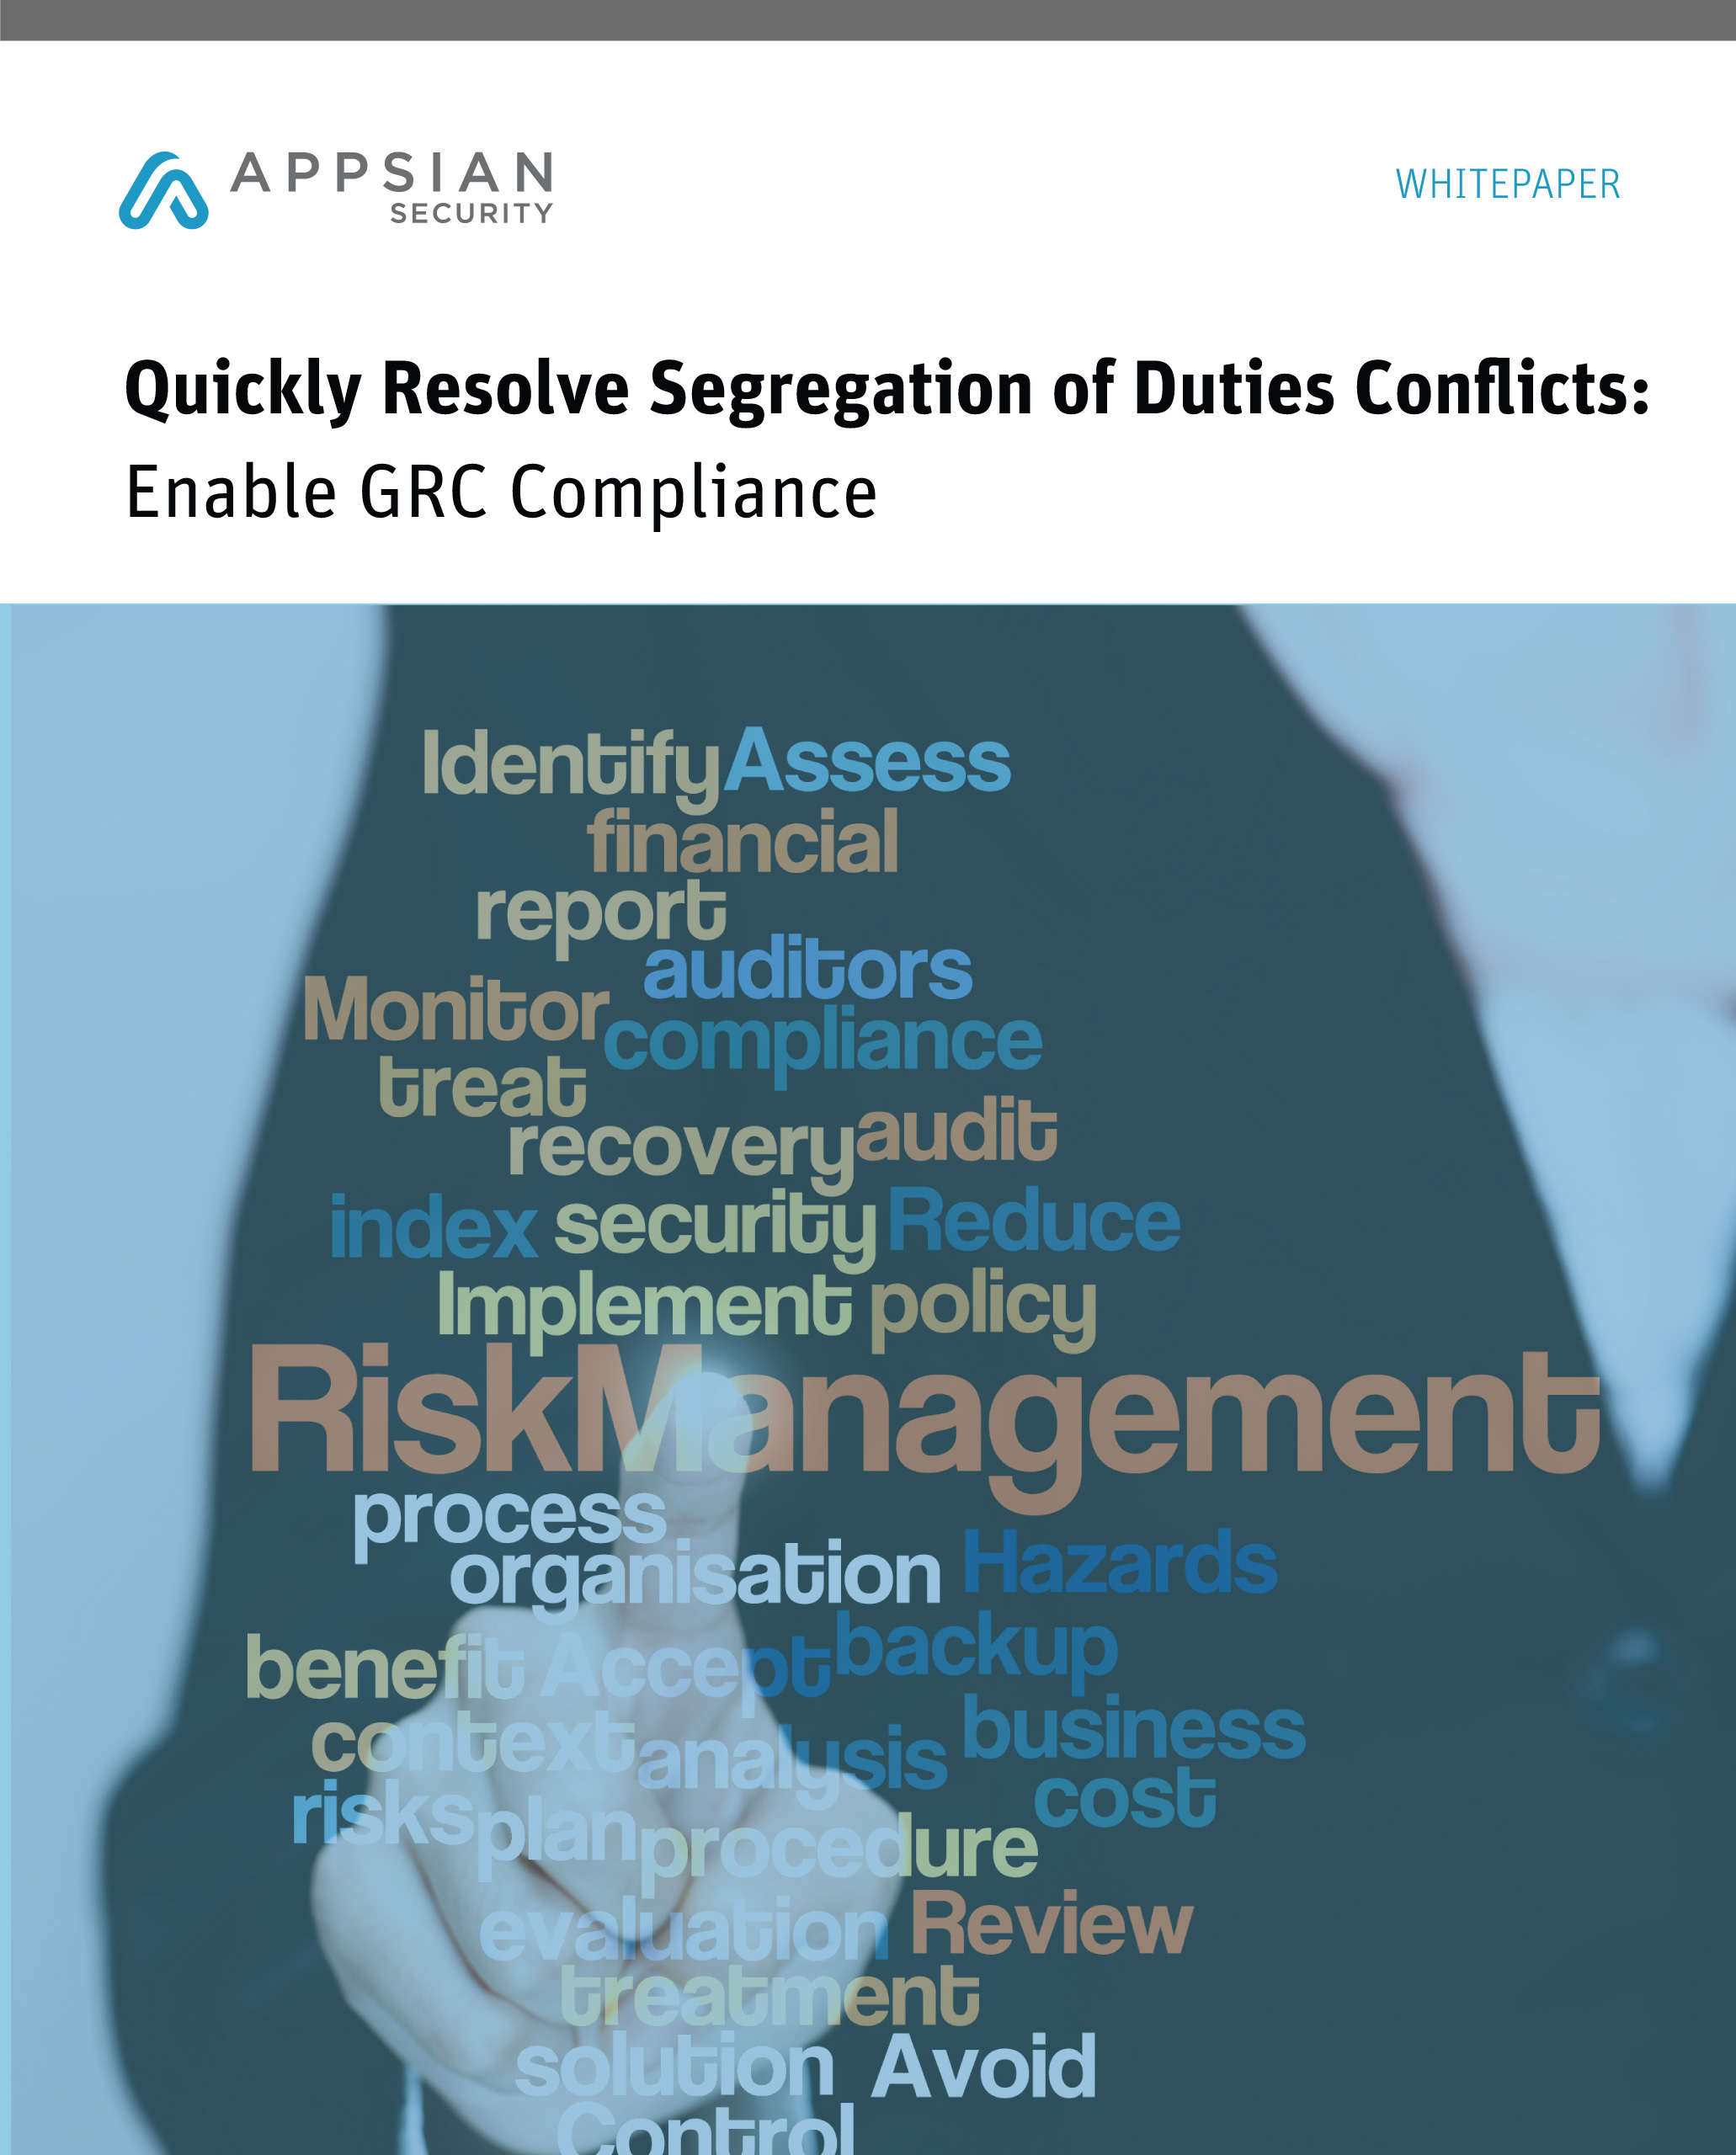 Quickly Resolve Segregation of Duties Conflicts: Enable GRC Compliance